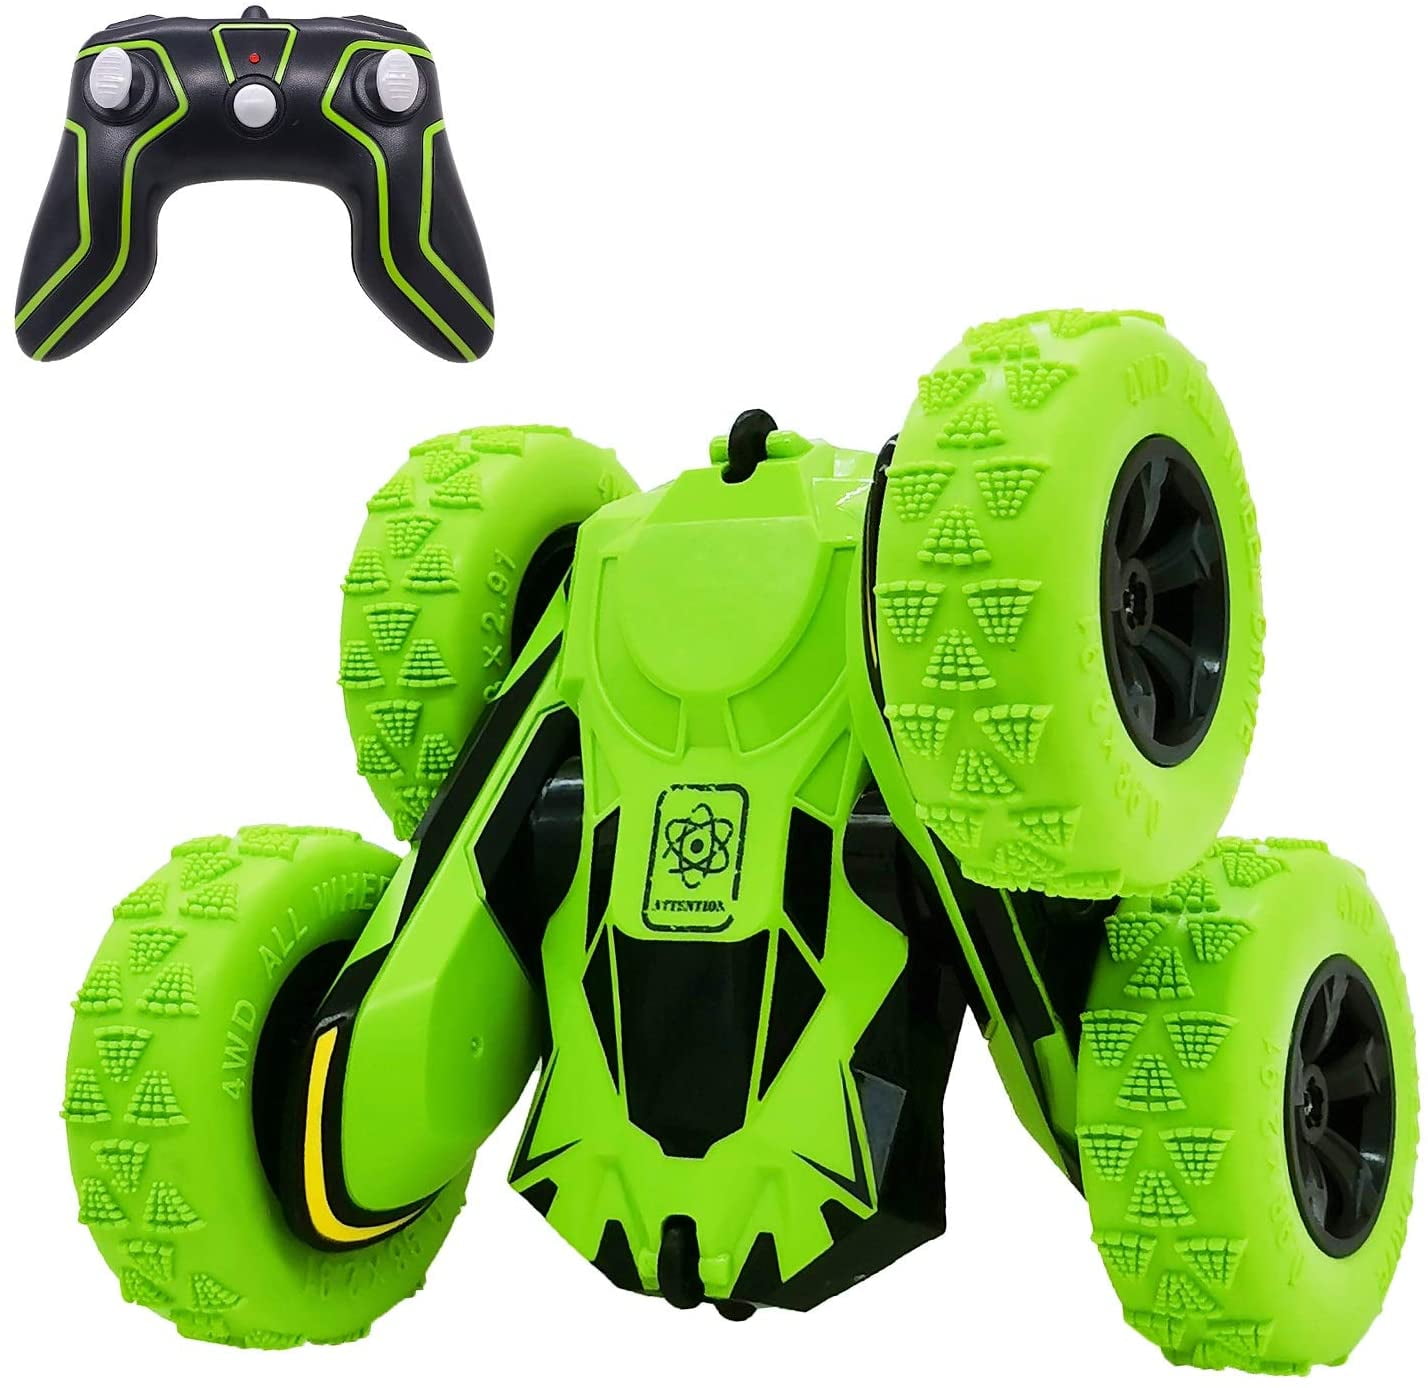 SGILE RC Stunt Car Toy Gift, 4WD Remote Control Car with 2 Sided 360  Rotating Rc Car for Kids Girls Boys Age 6 7 8 12, Green